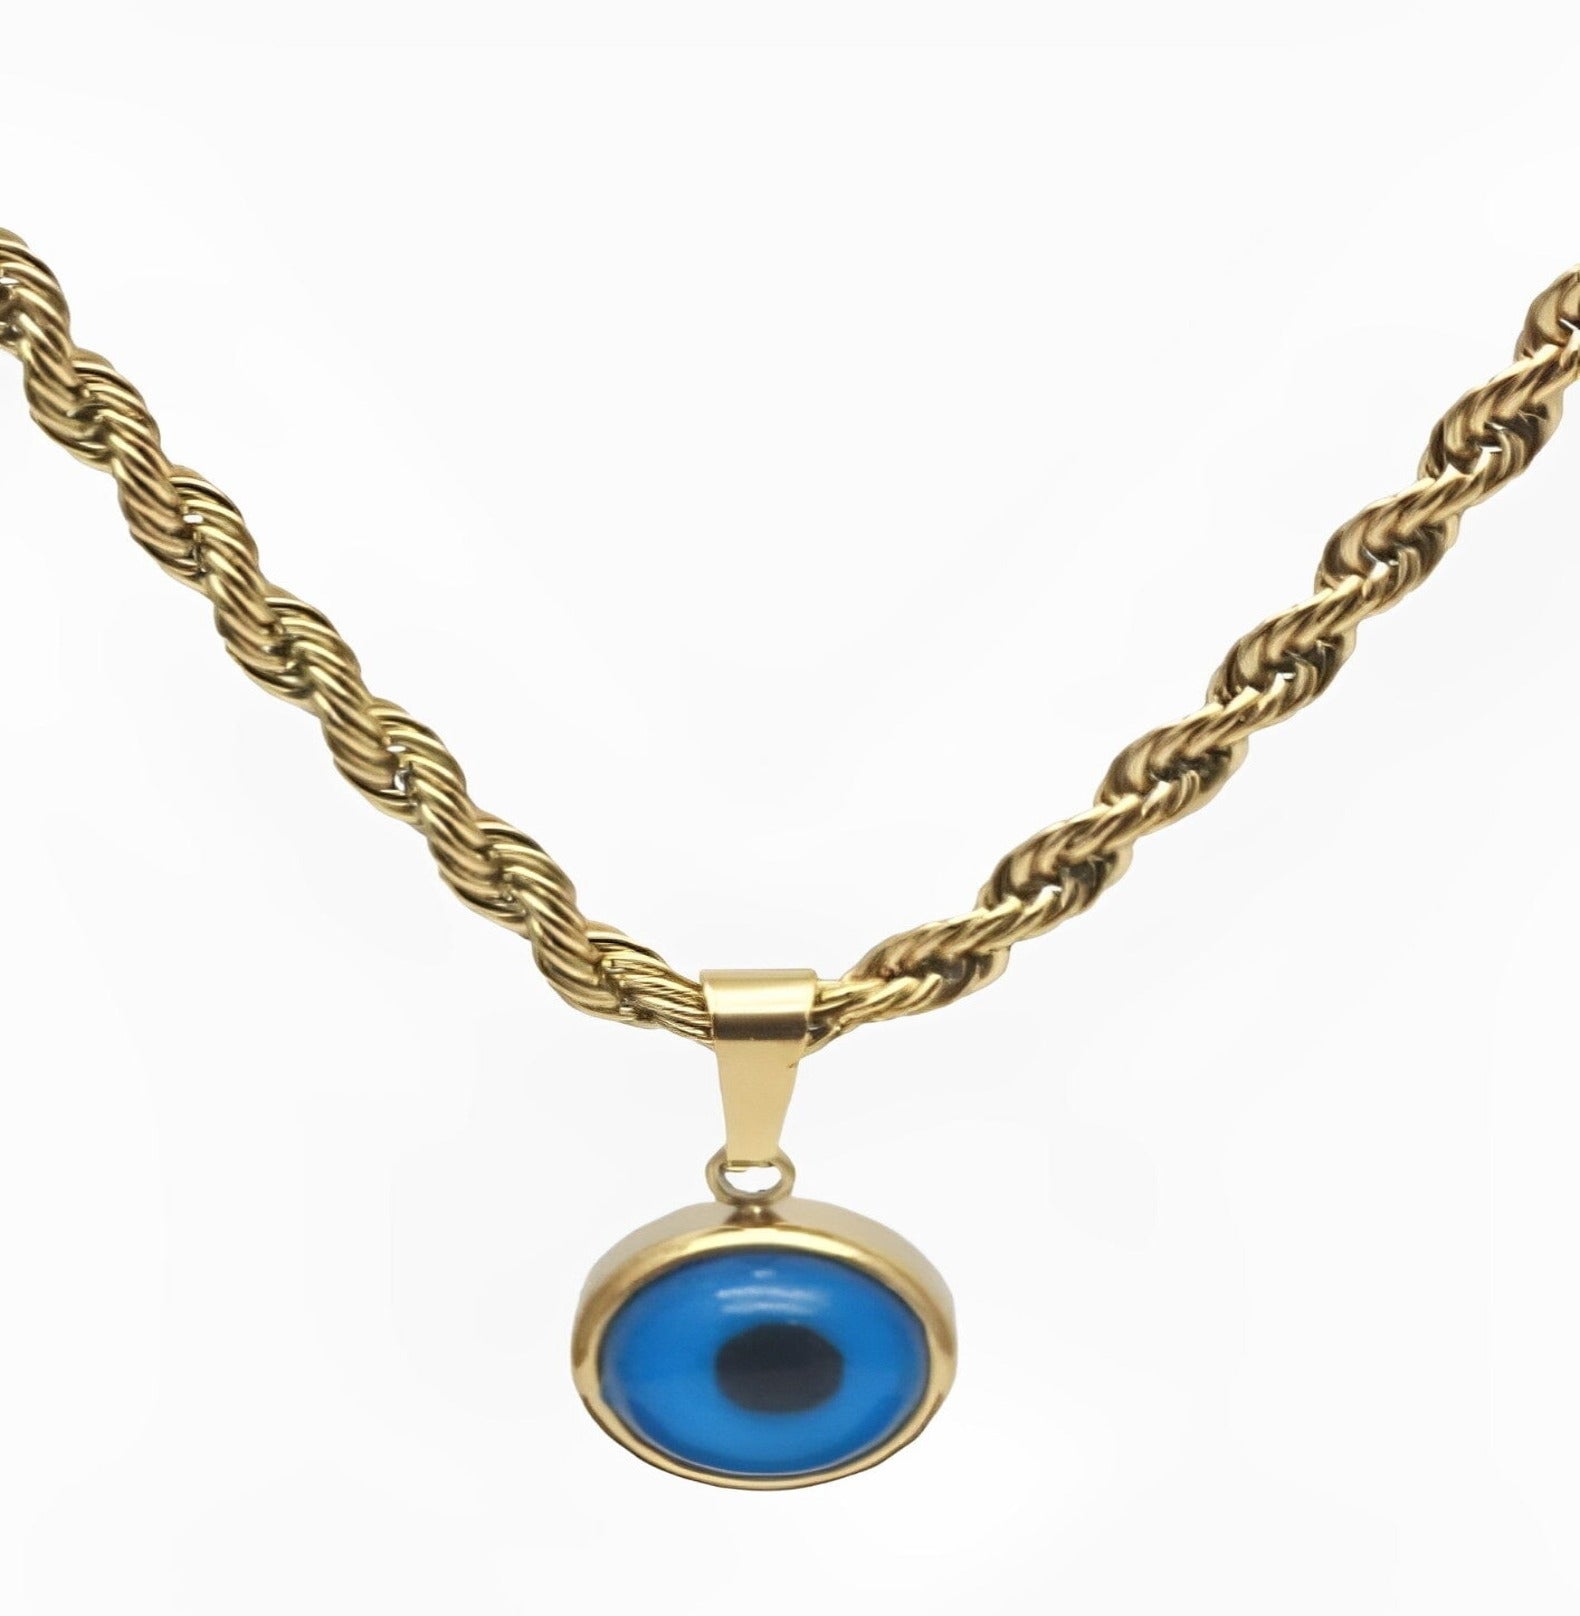 EYE EVIL NECKLACE neck Yubama Jewelry Online Store - The Elegant Designs of Gold and Silver ! 